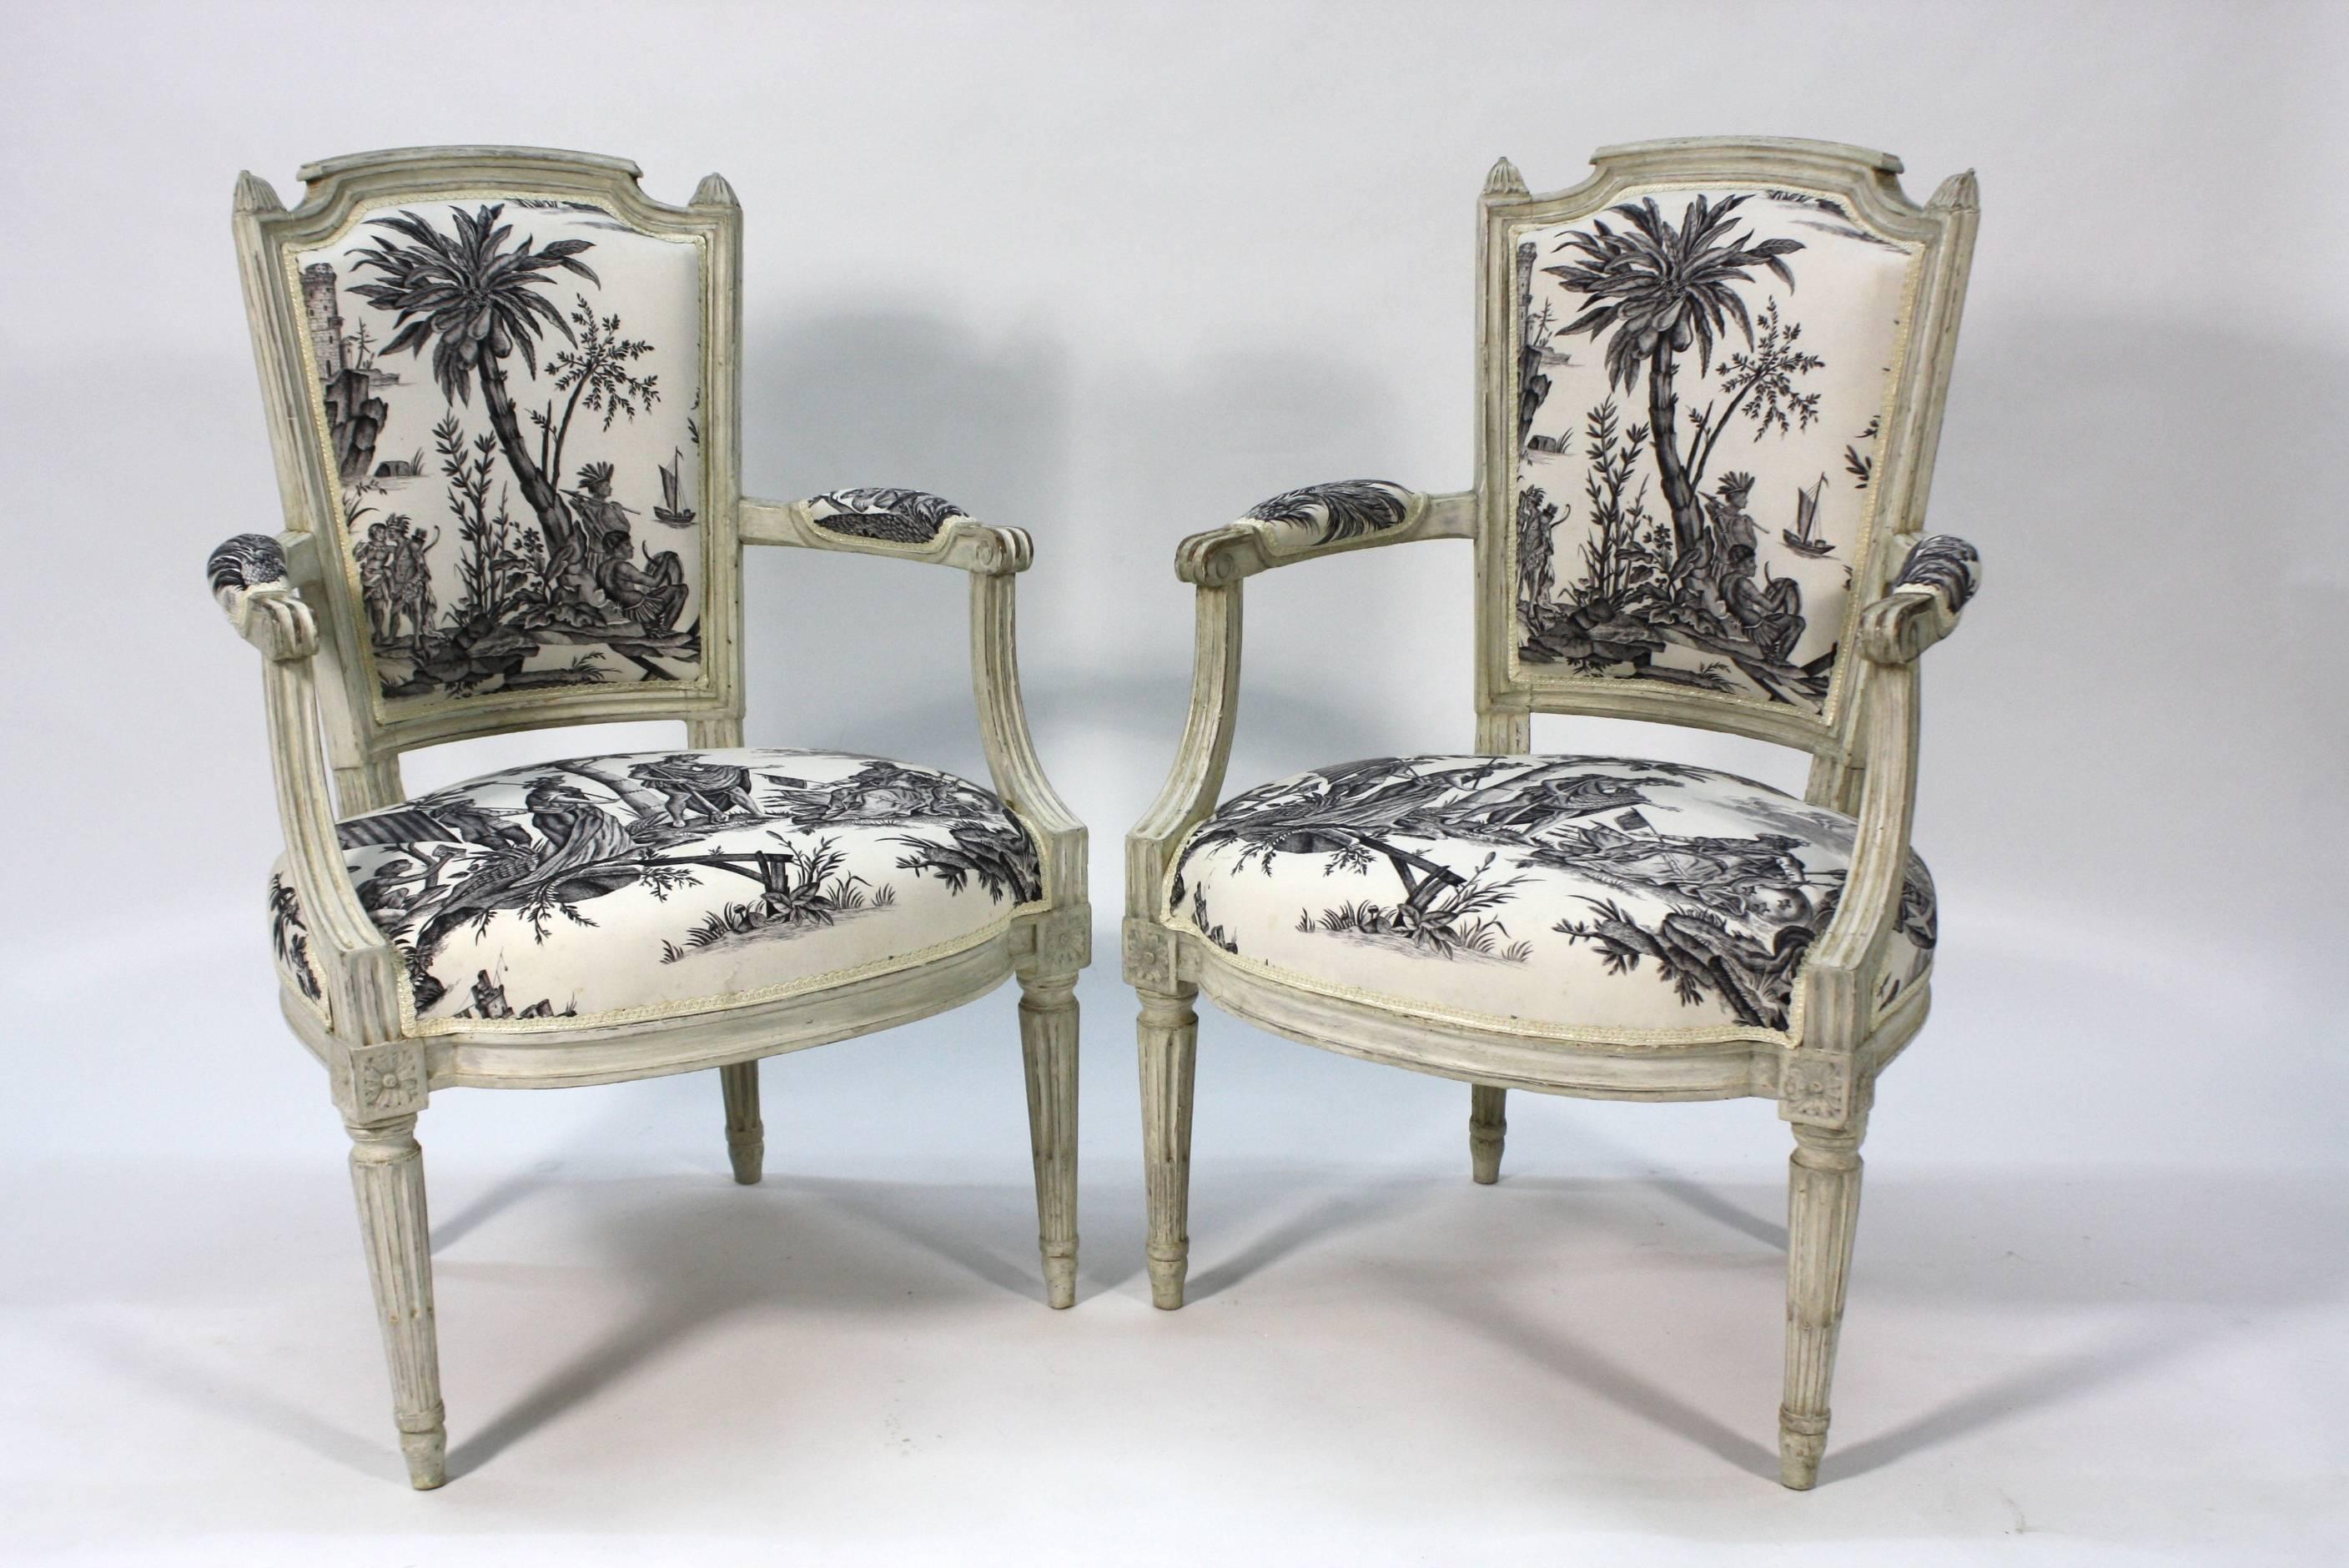 A stunning pair of French Louis XVI style painted armchairs or fauteuils with 